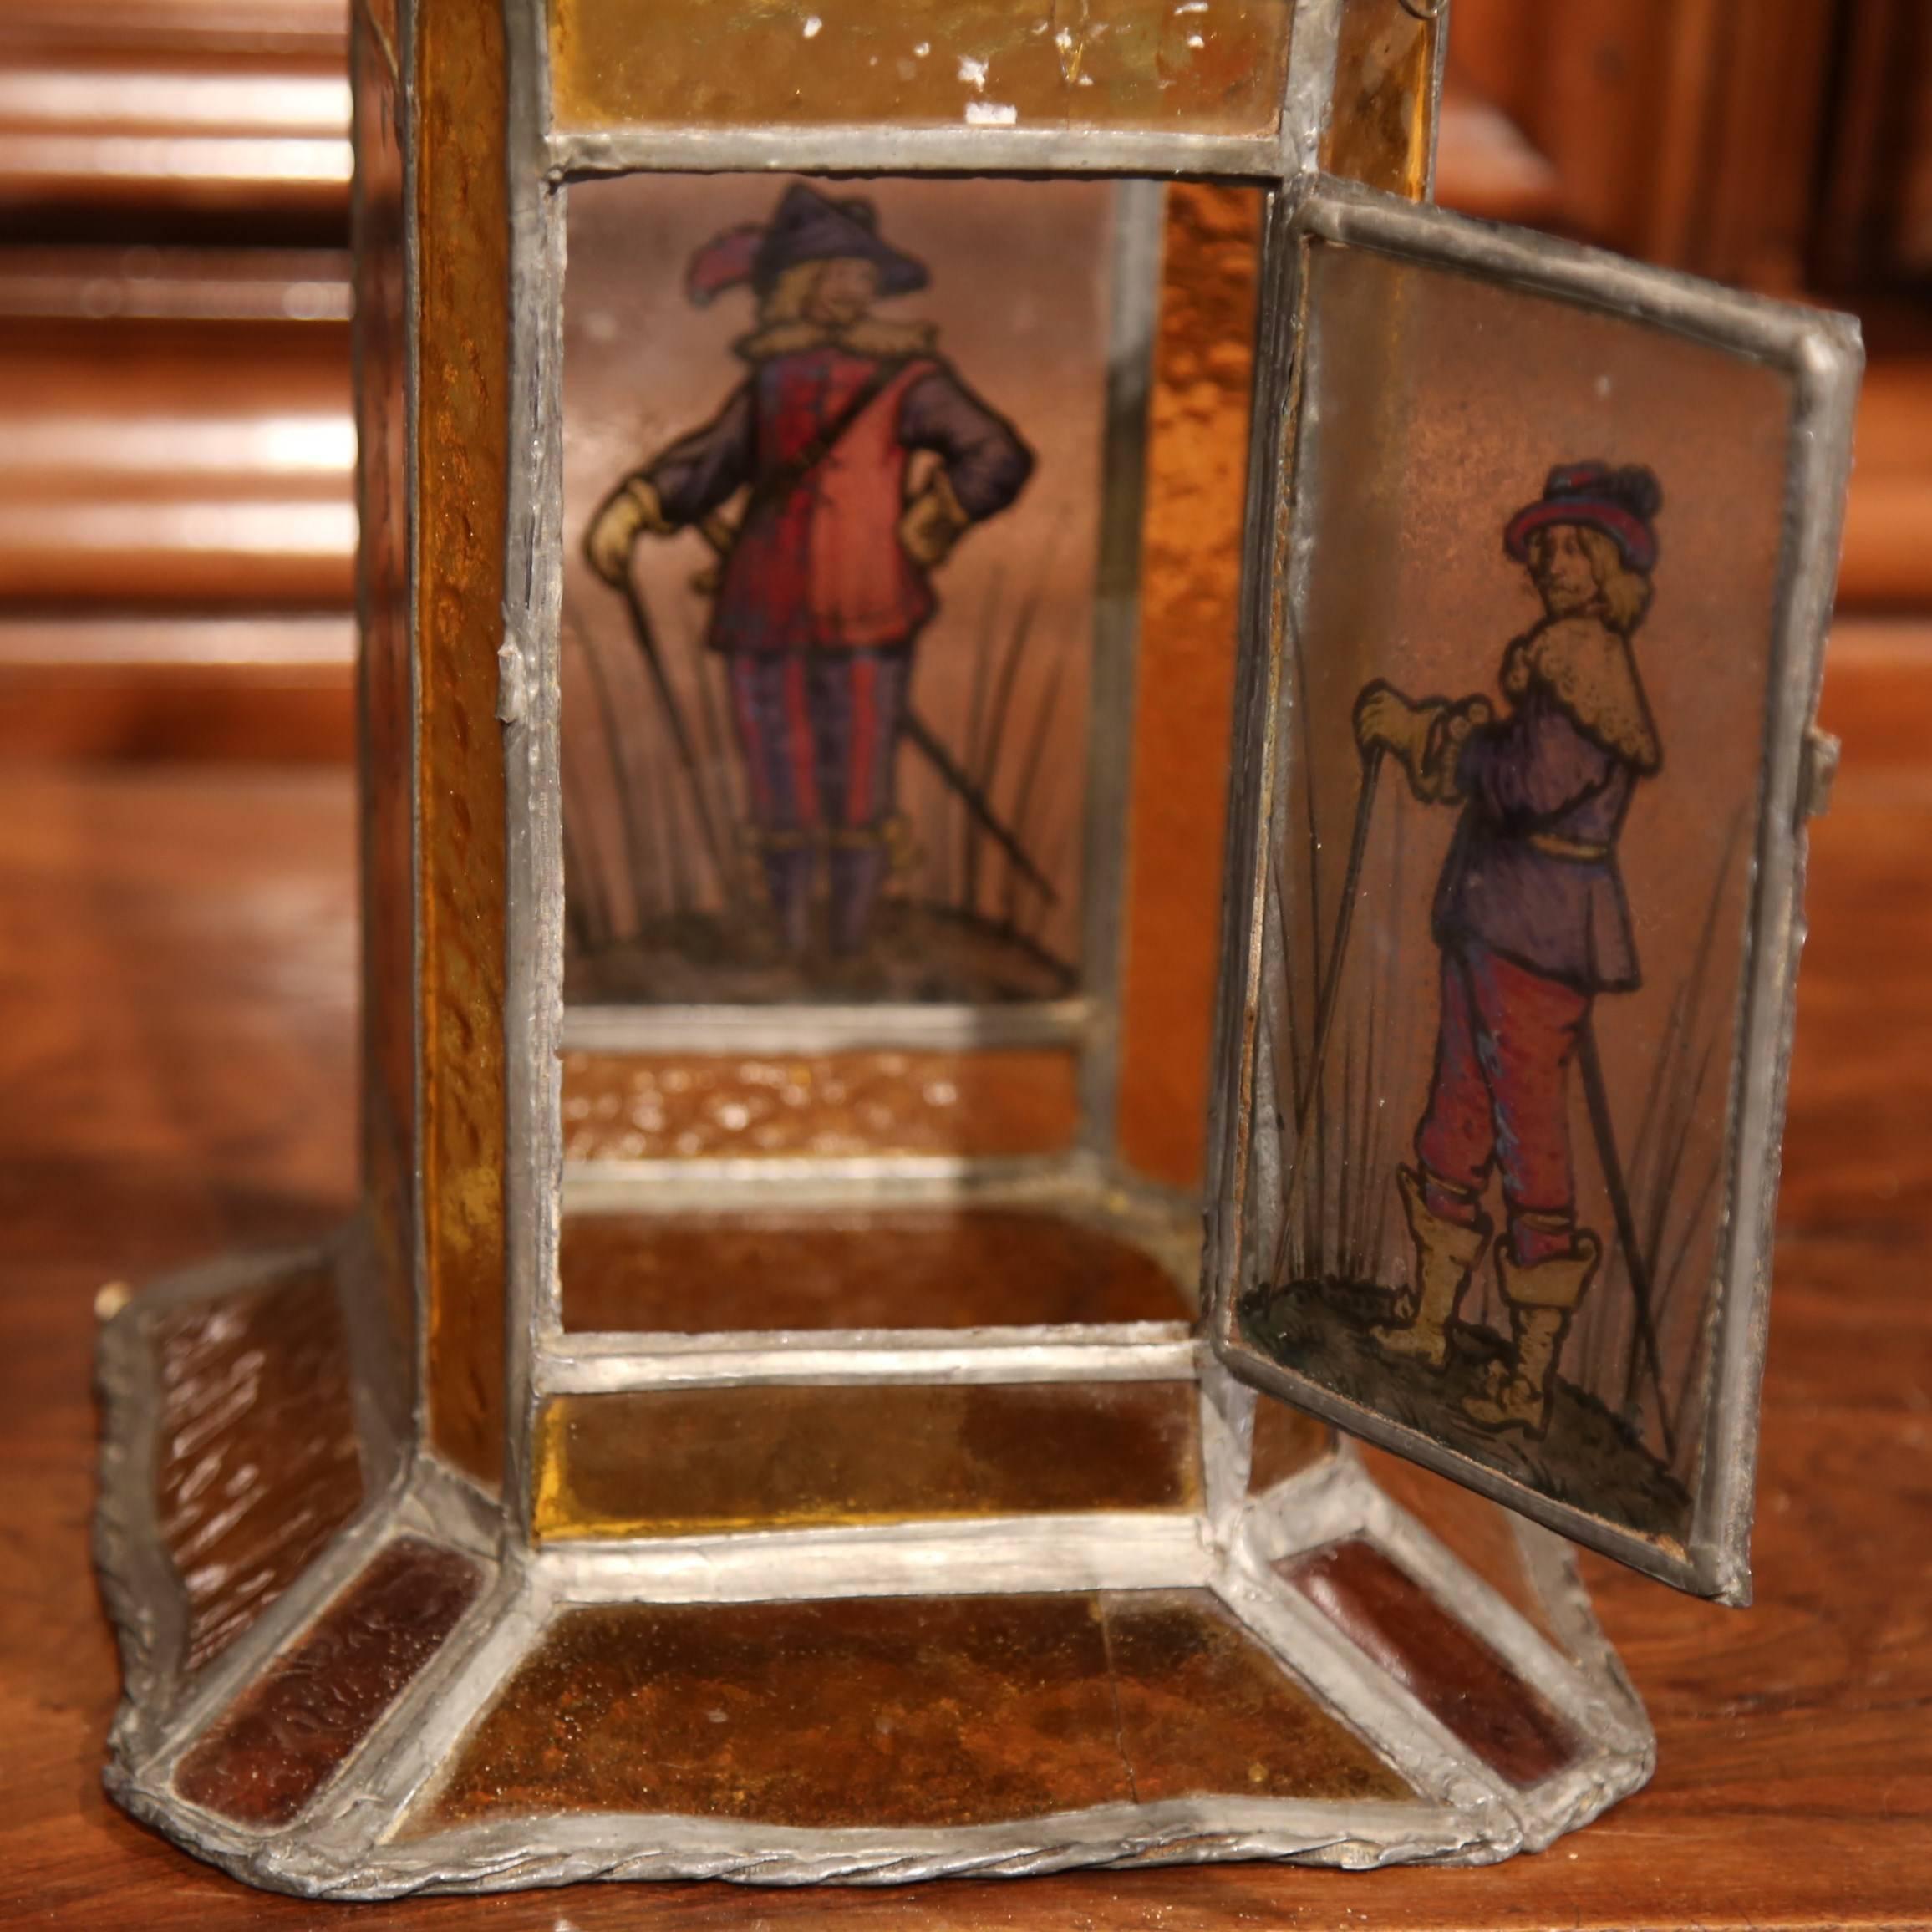 Hand-Crafted 19th Century French Stain Glass Lantern with Four Hand-Painted Musketeers